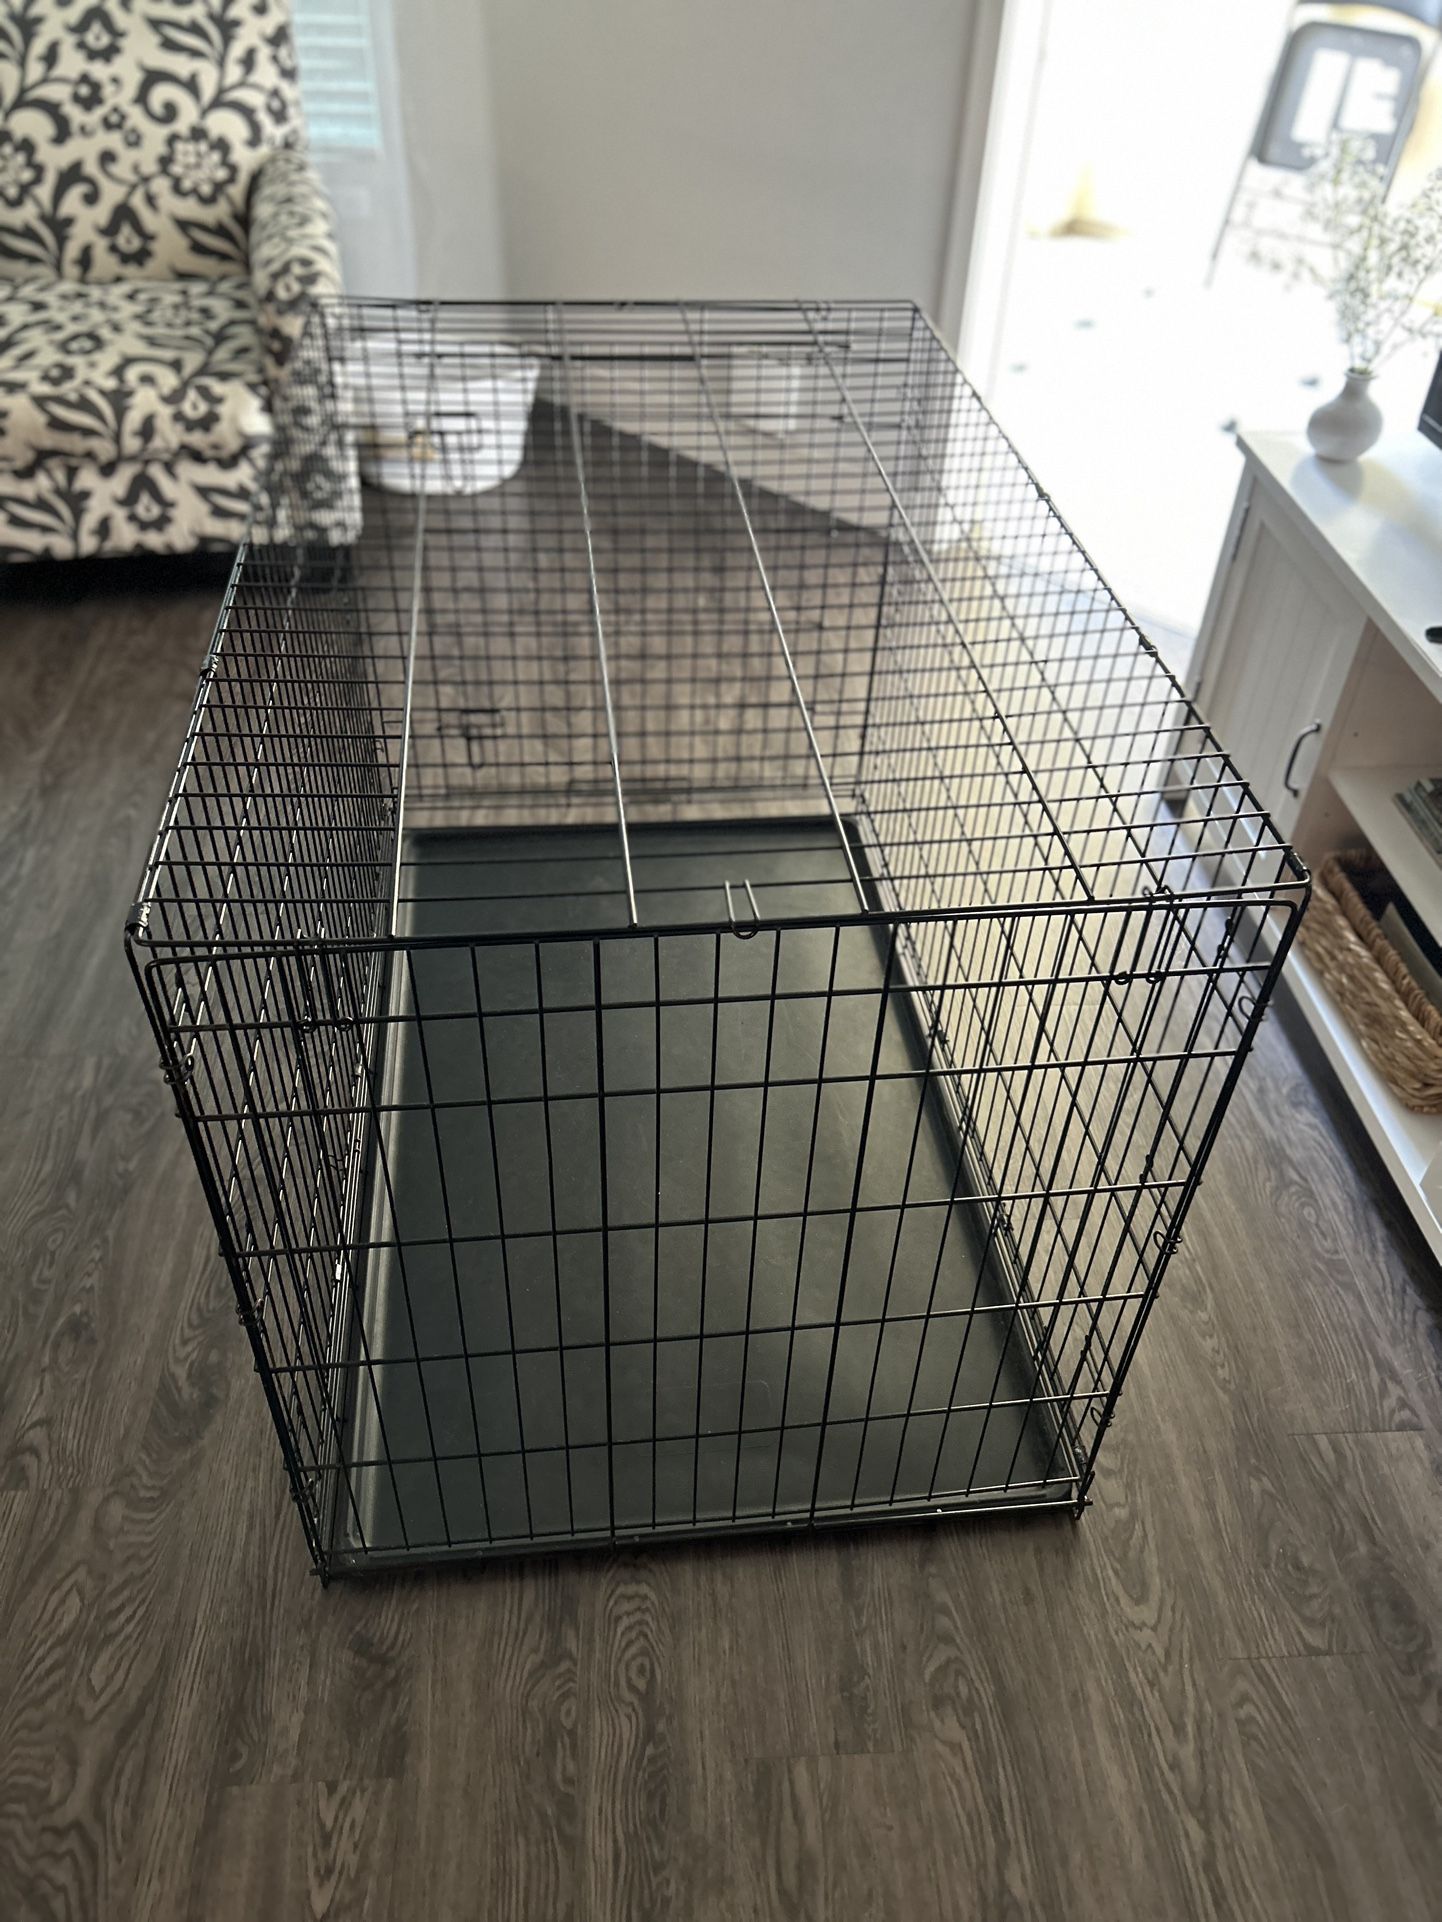 Top Paw Wire Dog Crate 